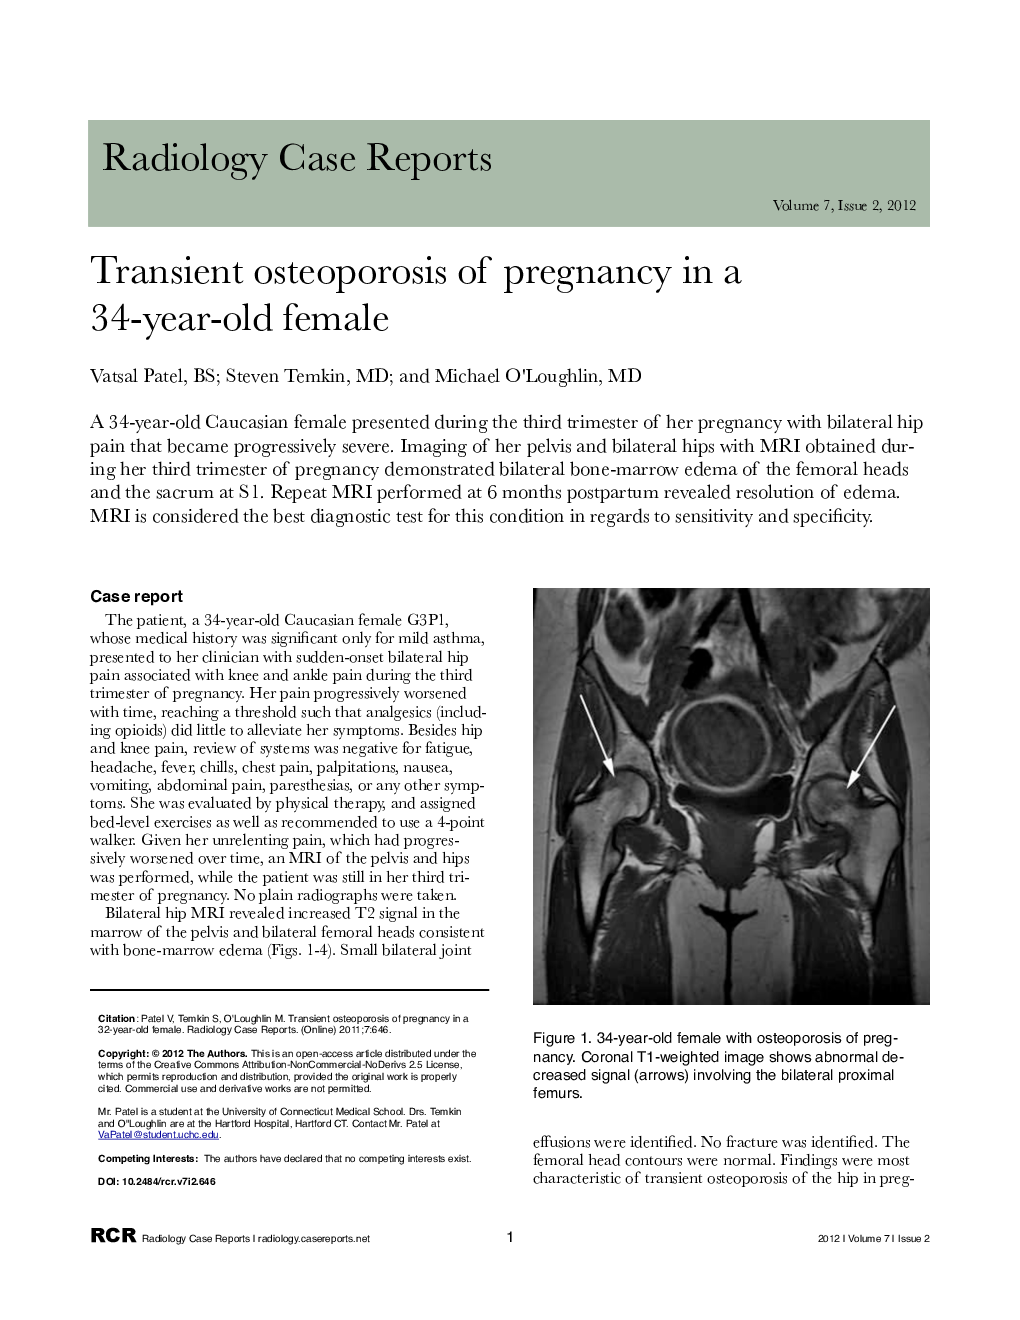 Transient osteoporosis of pregnancy in a 34-year-old female